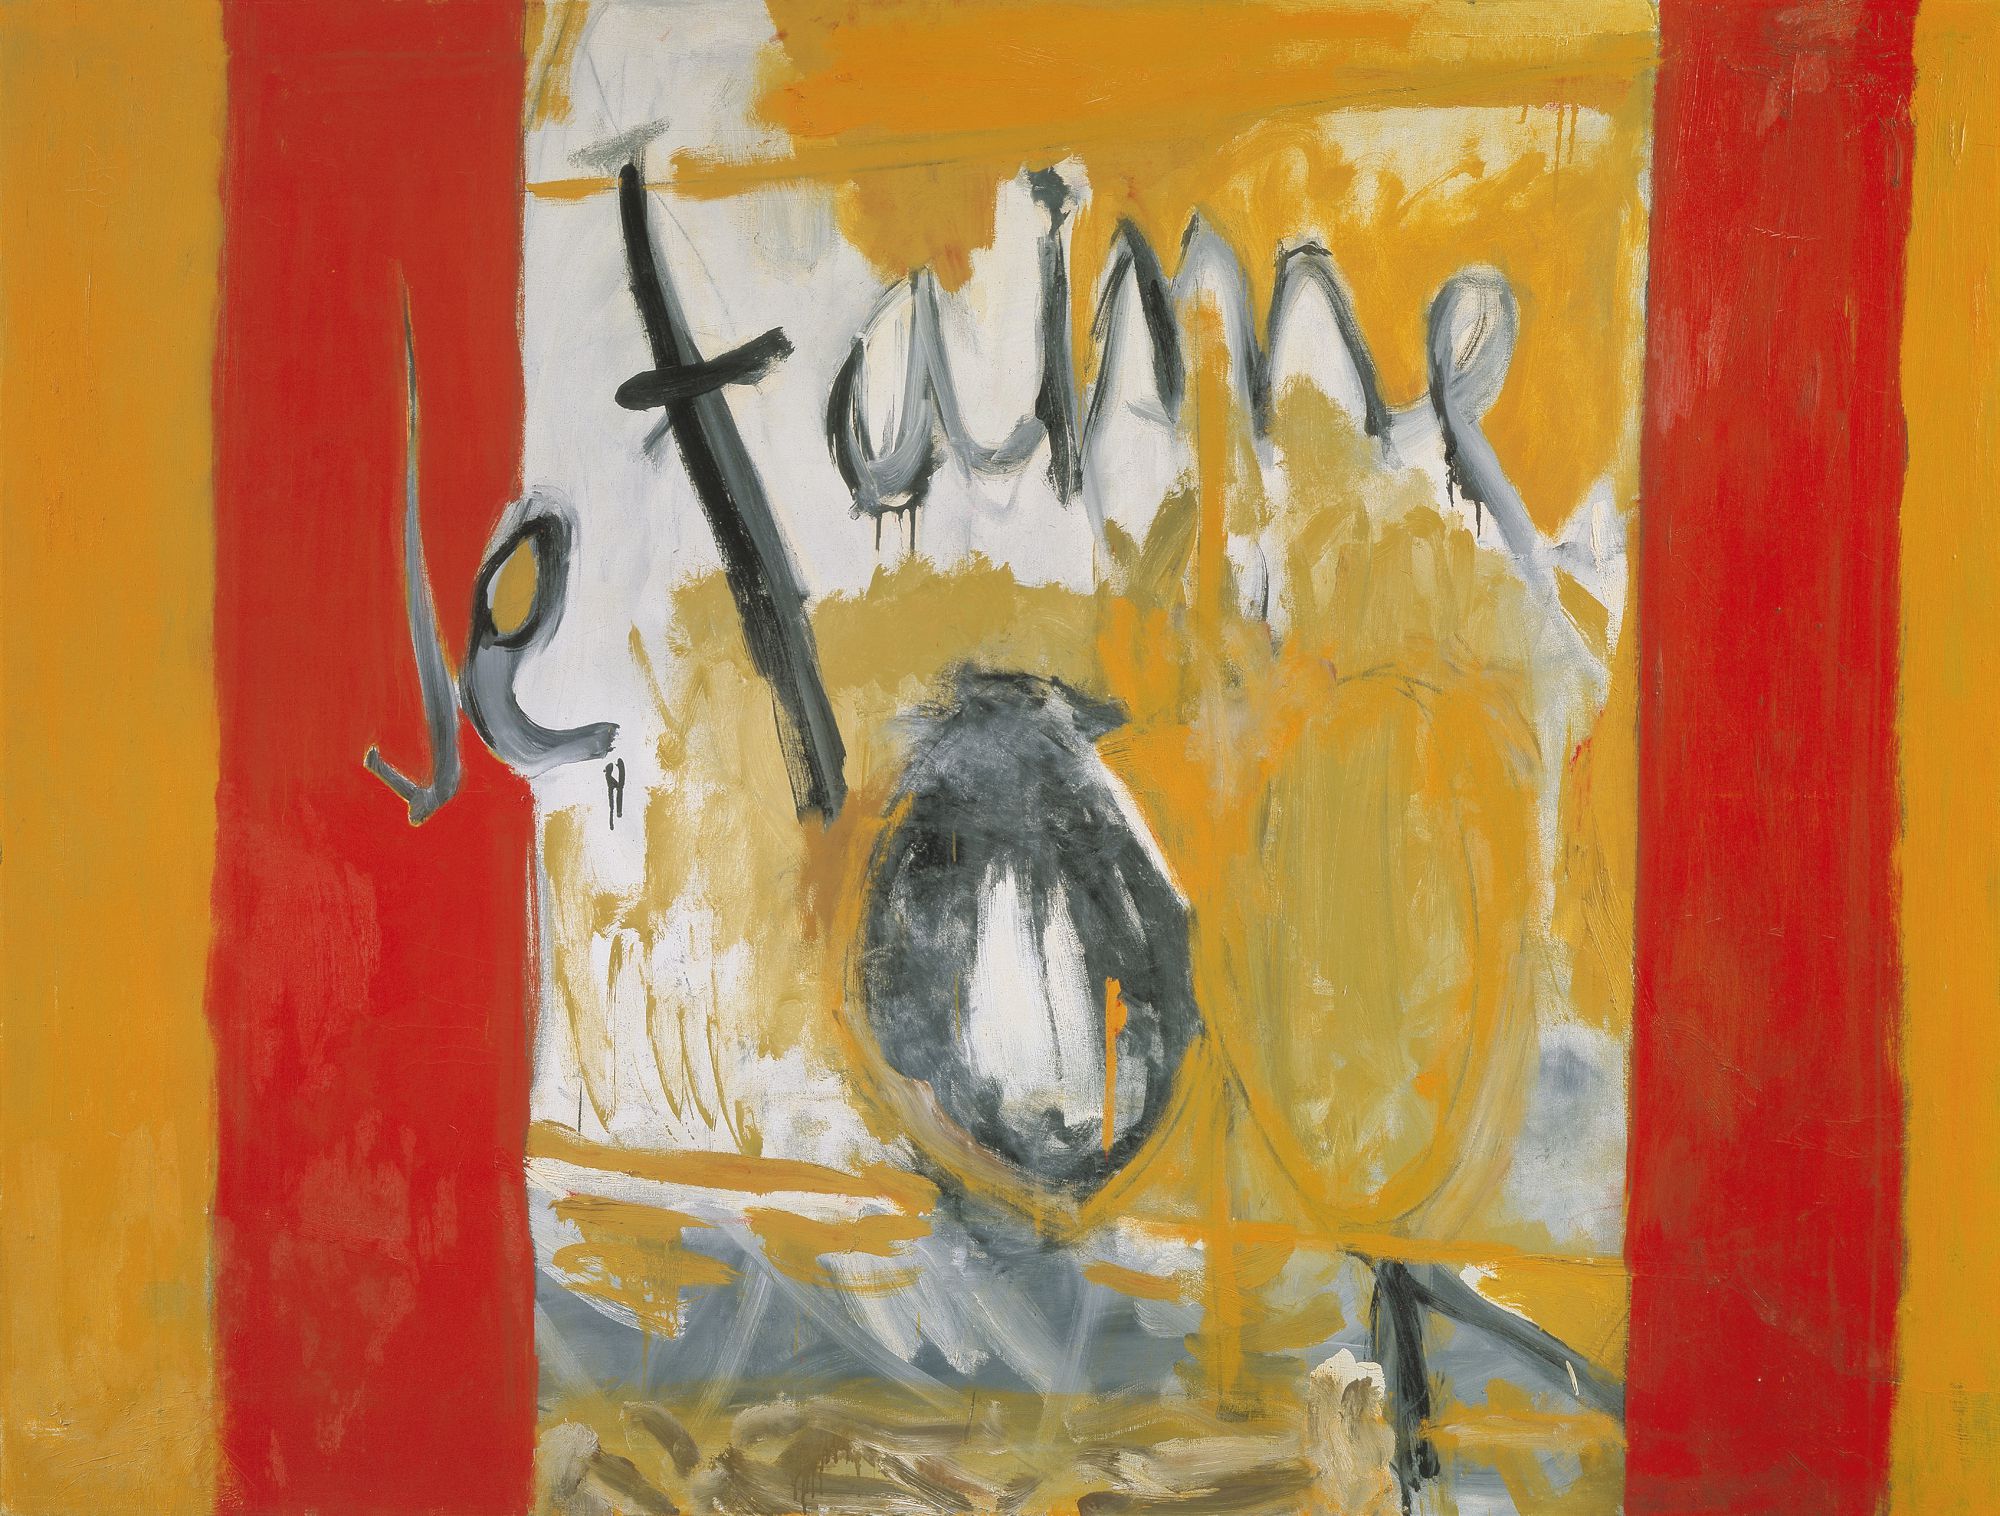 Je t’aime No. II, 1955 oil and charcoal on canvas, 54 ✕ 72 in. (137.2 ✕ 182.9 cm)